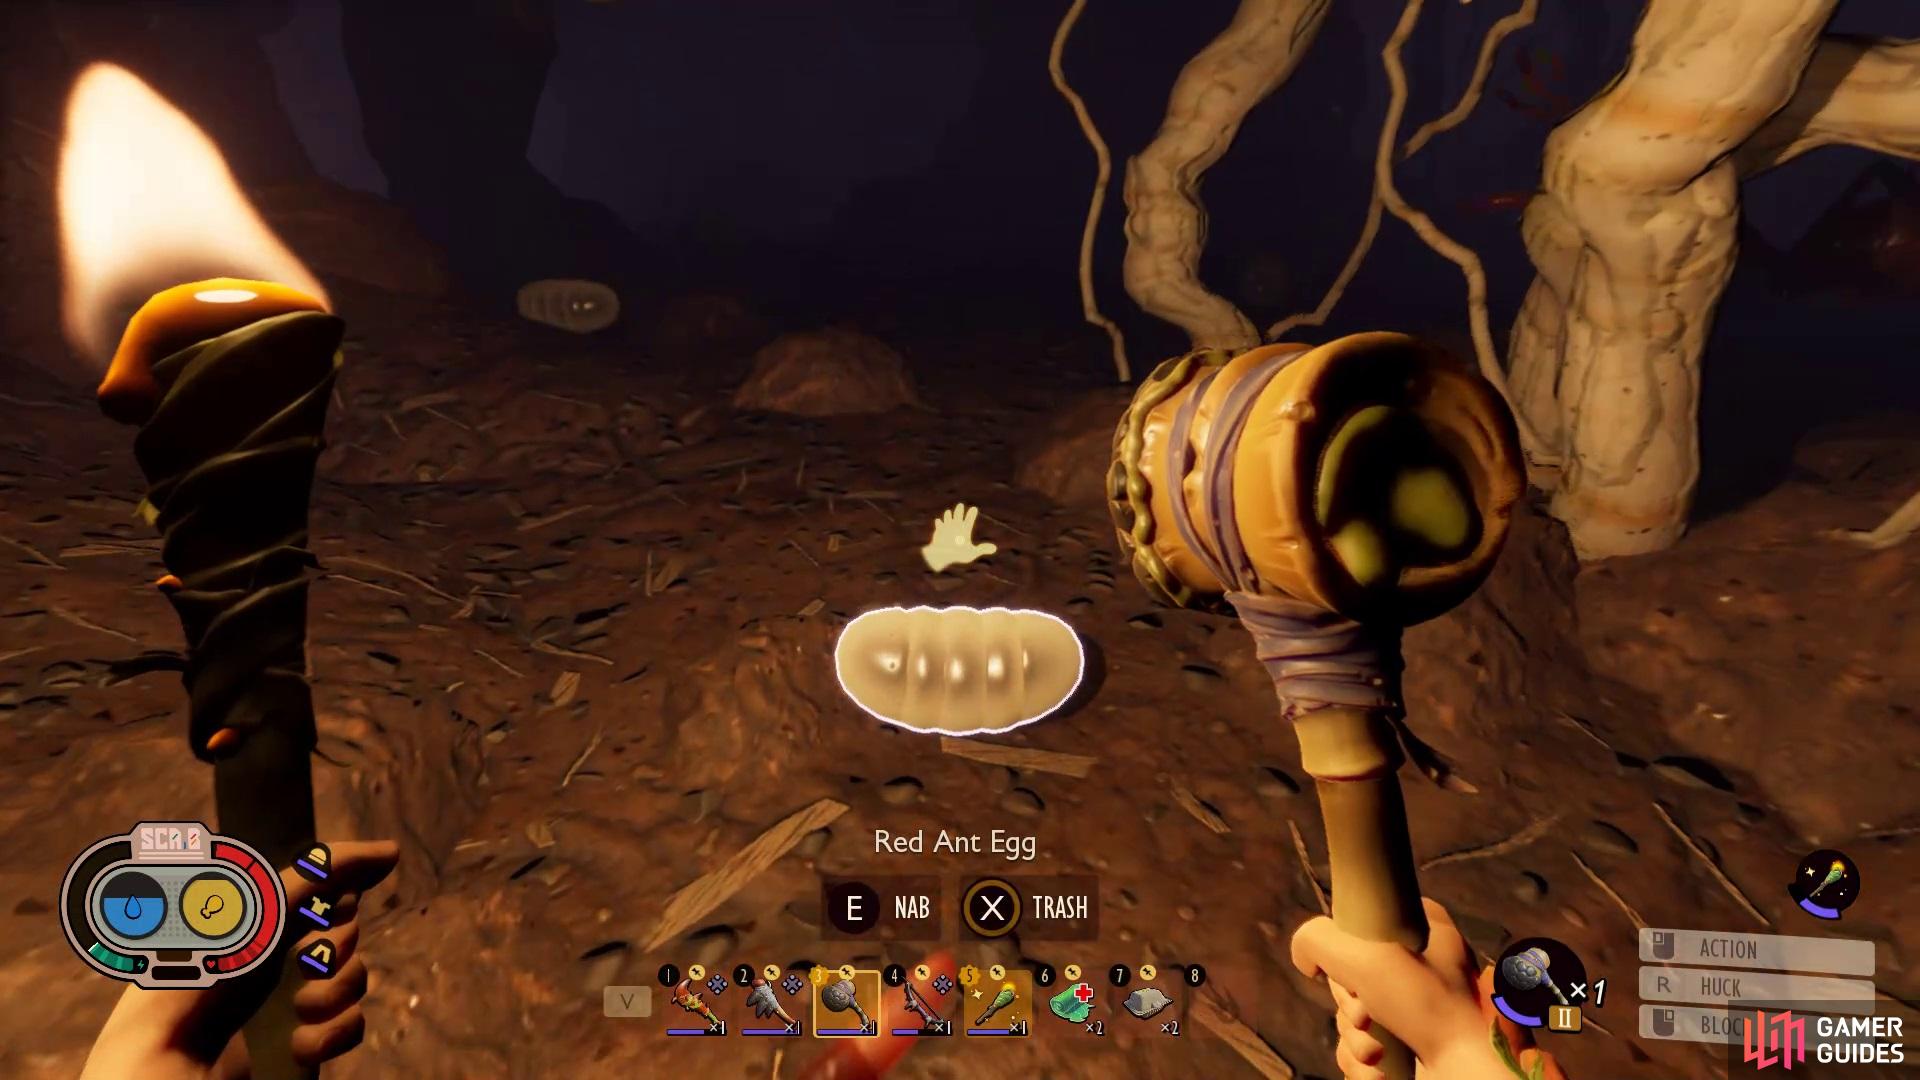 Head into the Red Anthill to find eggs!